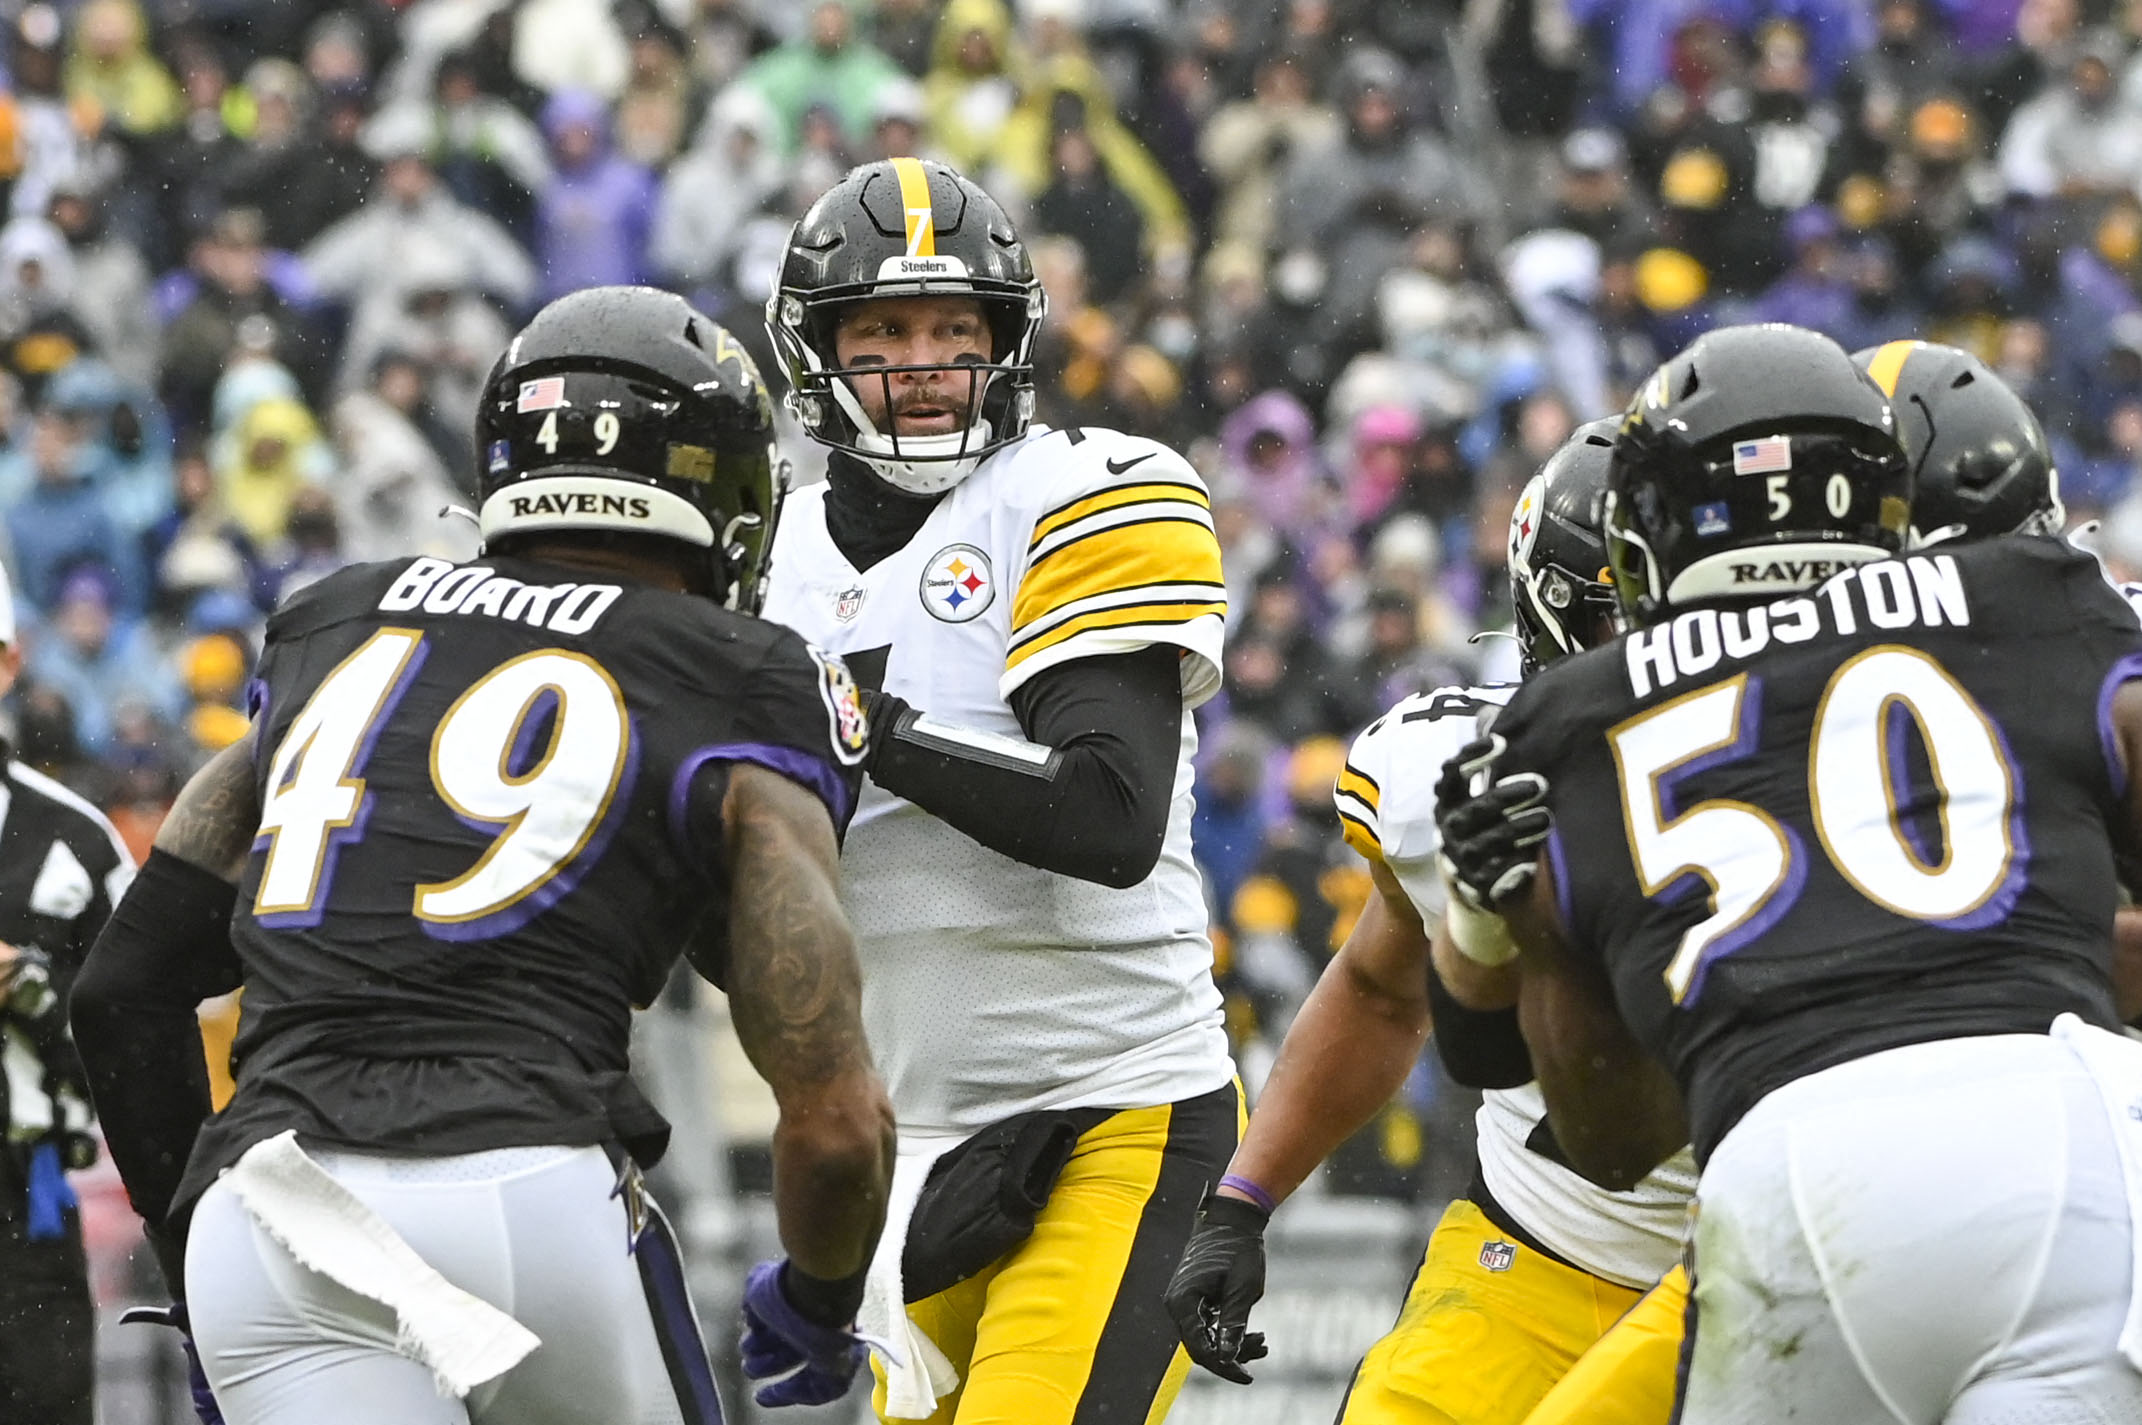 Jan 9, 2022; Baltimore, Maryland, USA;  Pittsburgh Steelers quarterback Ben Roethlisberger (7) drops back to pass as Baltimore Ravens linebacker Chris Board (49) and outside linebacker Justin Houston (50) aplly pressure during the first quarter at M&T Bank Stadium. Mandatory Credit: Tommy Gilligan-USA TODAY Sports